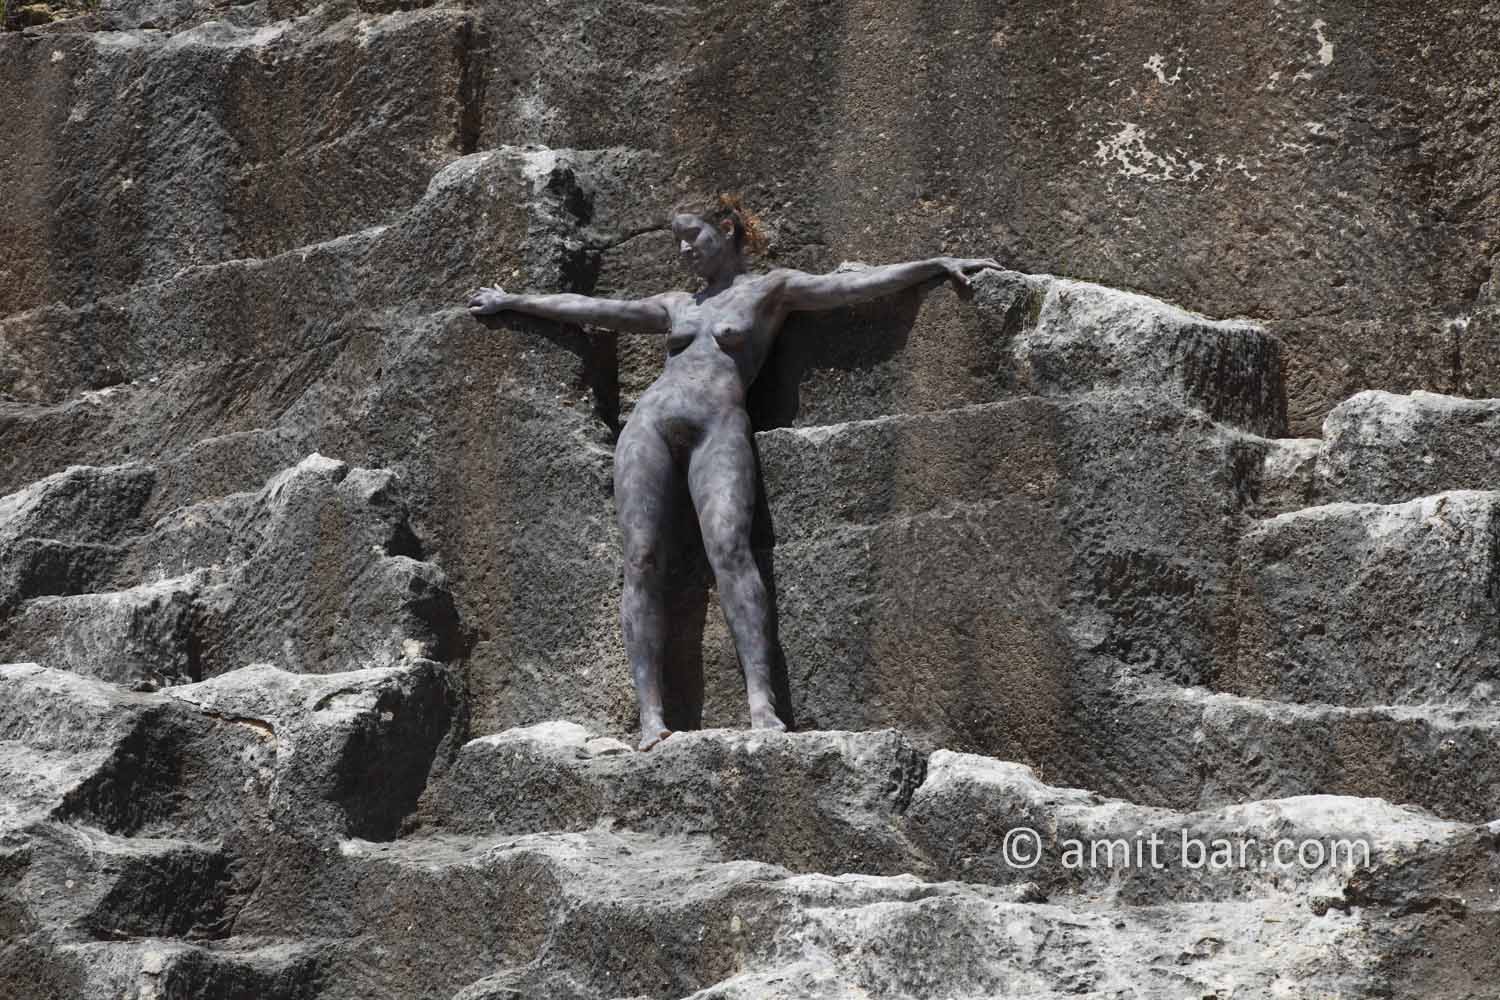 Black rock 2-II: Body-painted model is standing in a ancient quarry